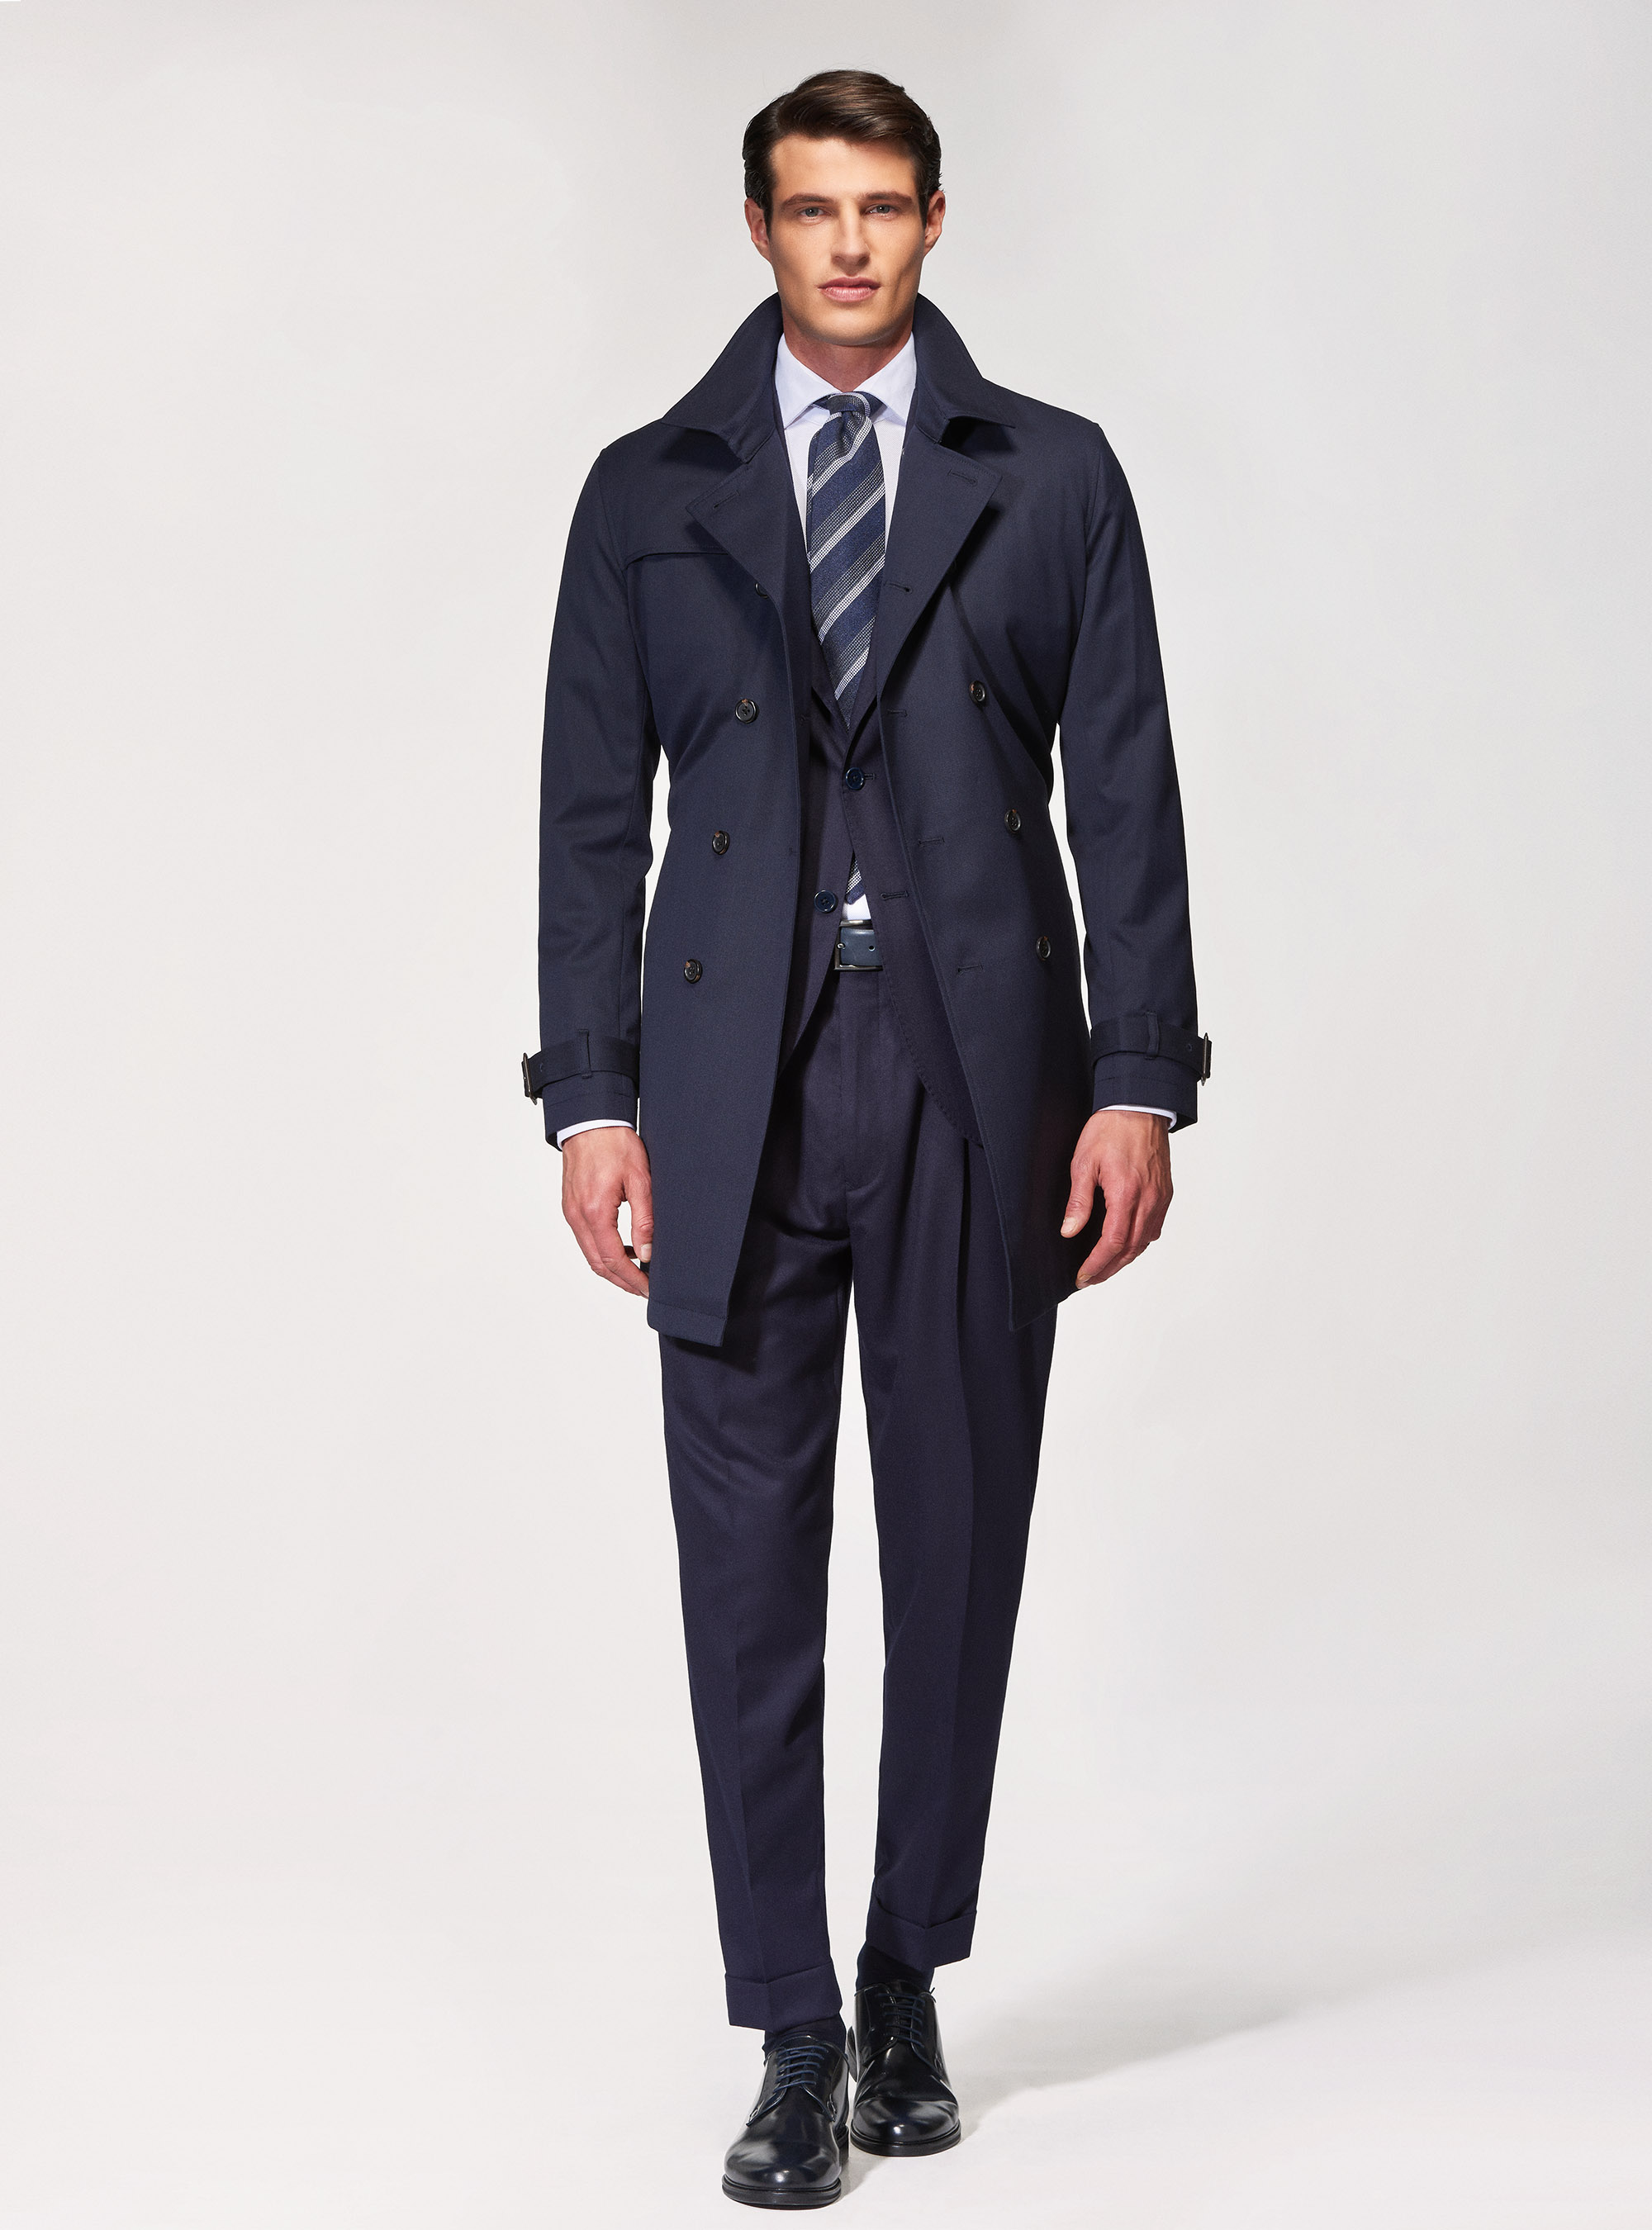 Trench Coat Over Suit | lupon.gov.ph